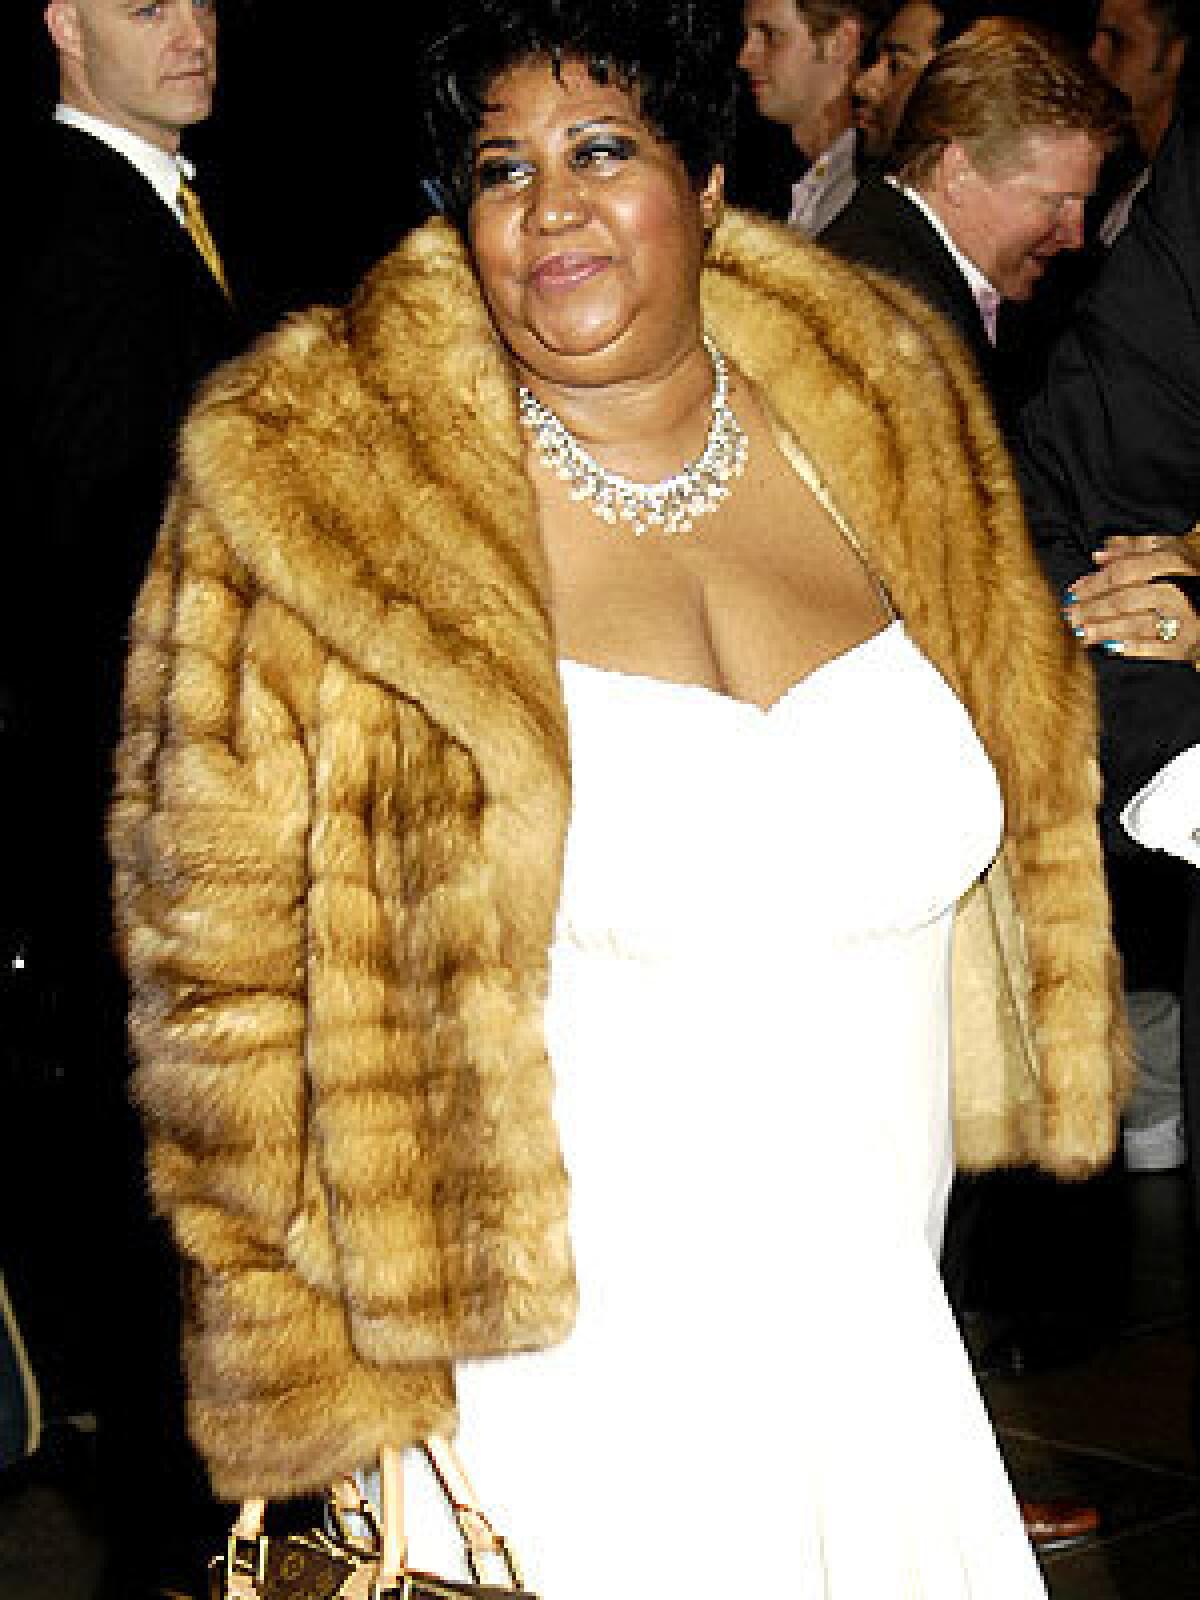 Aretha Franklin was crowned this year's worst-dressed celebrity by the animal rights organization. Her crime: wearing "yet another vulgar fur" at the Grammy Awards.